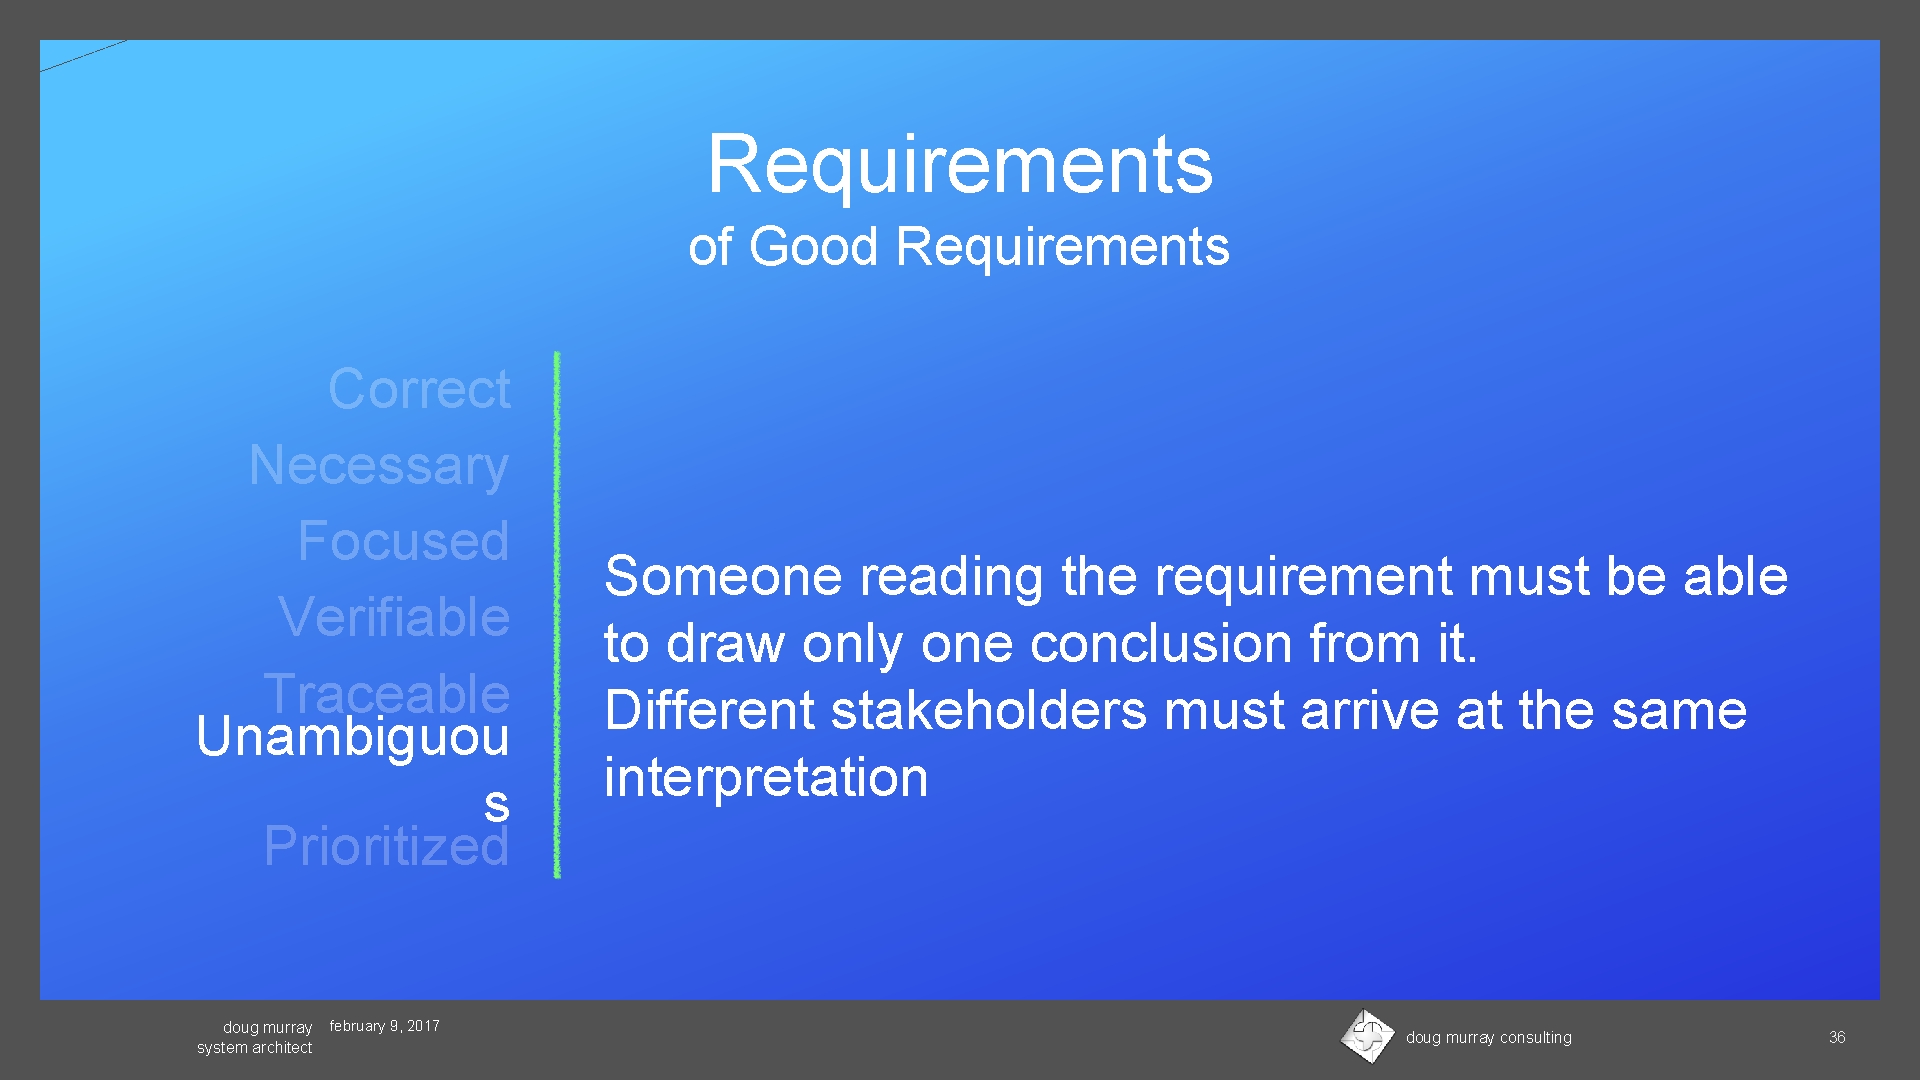 Requirements of Good Requirements Correct Necessary Focused Verifiable Traceable Unambiguou s Prioritized doug murray